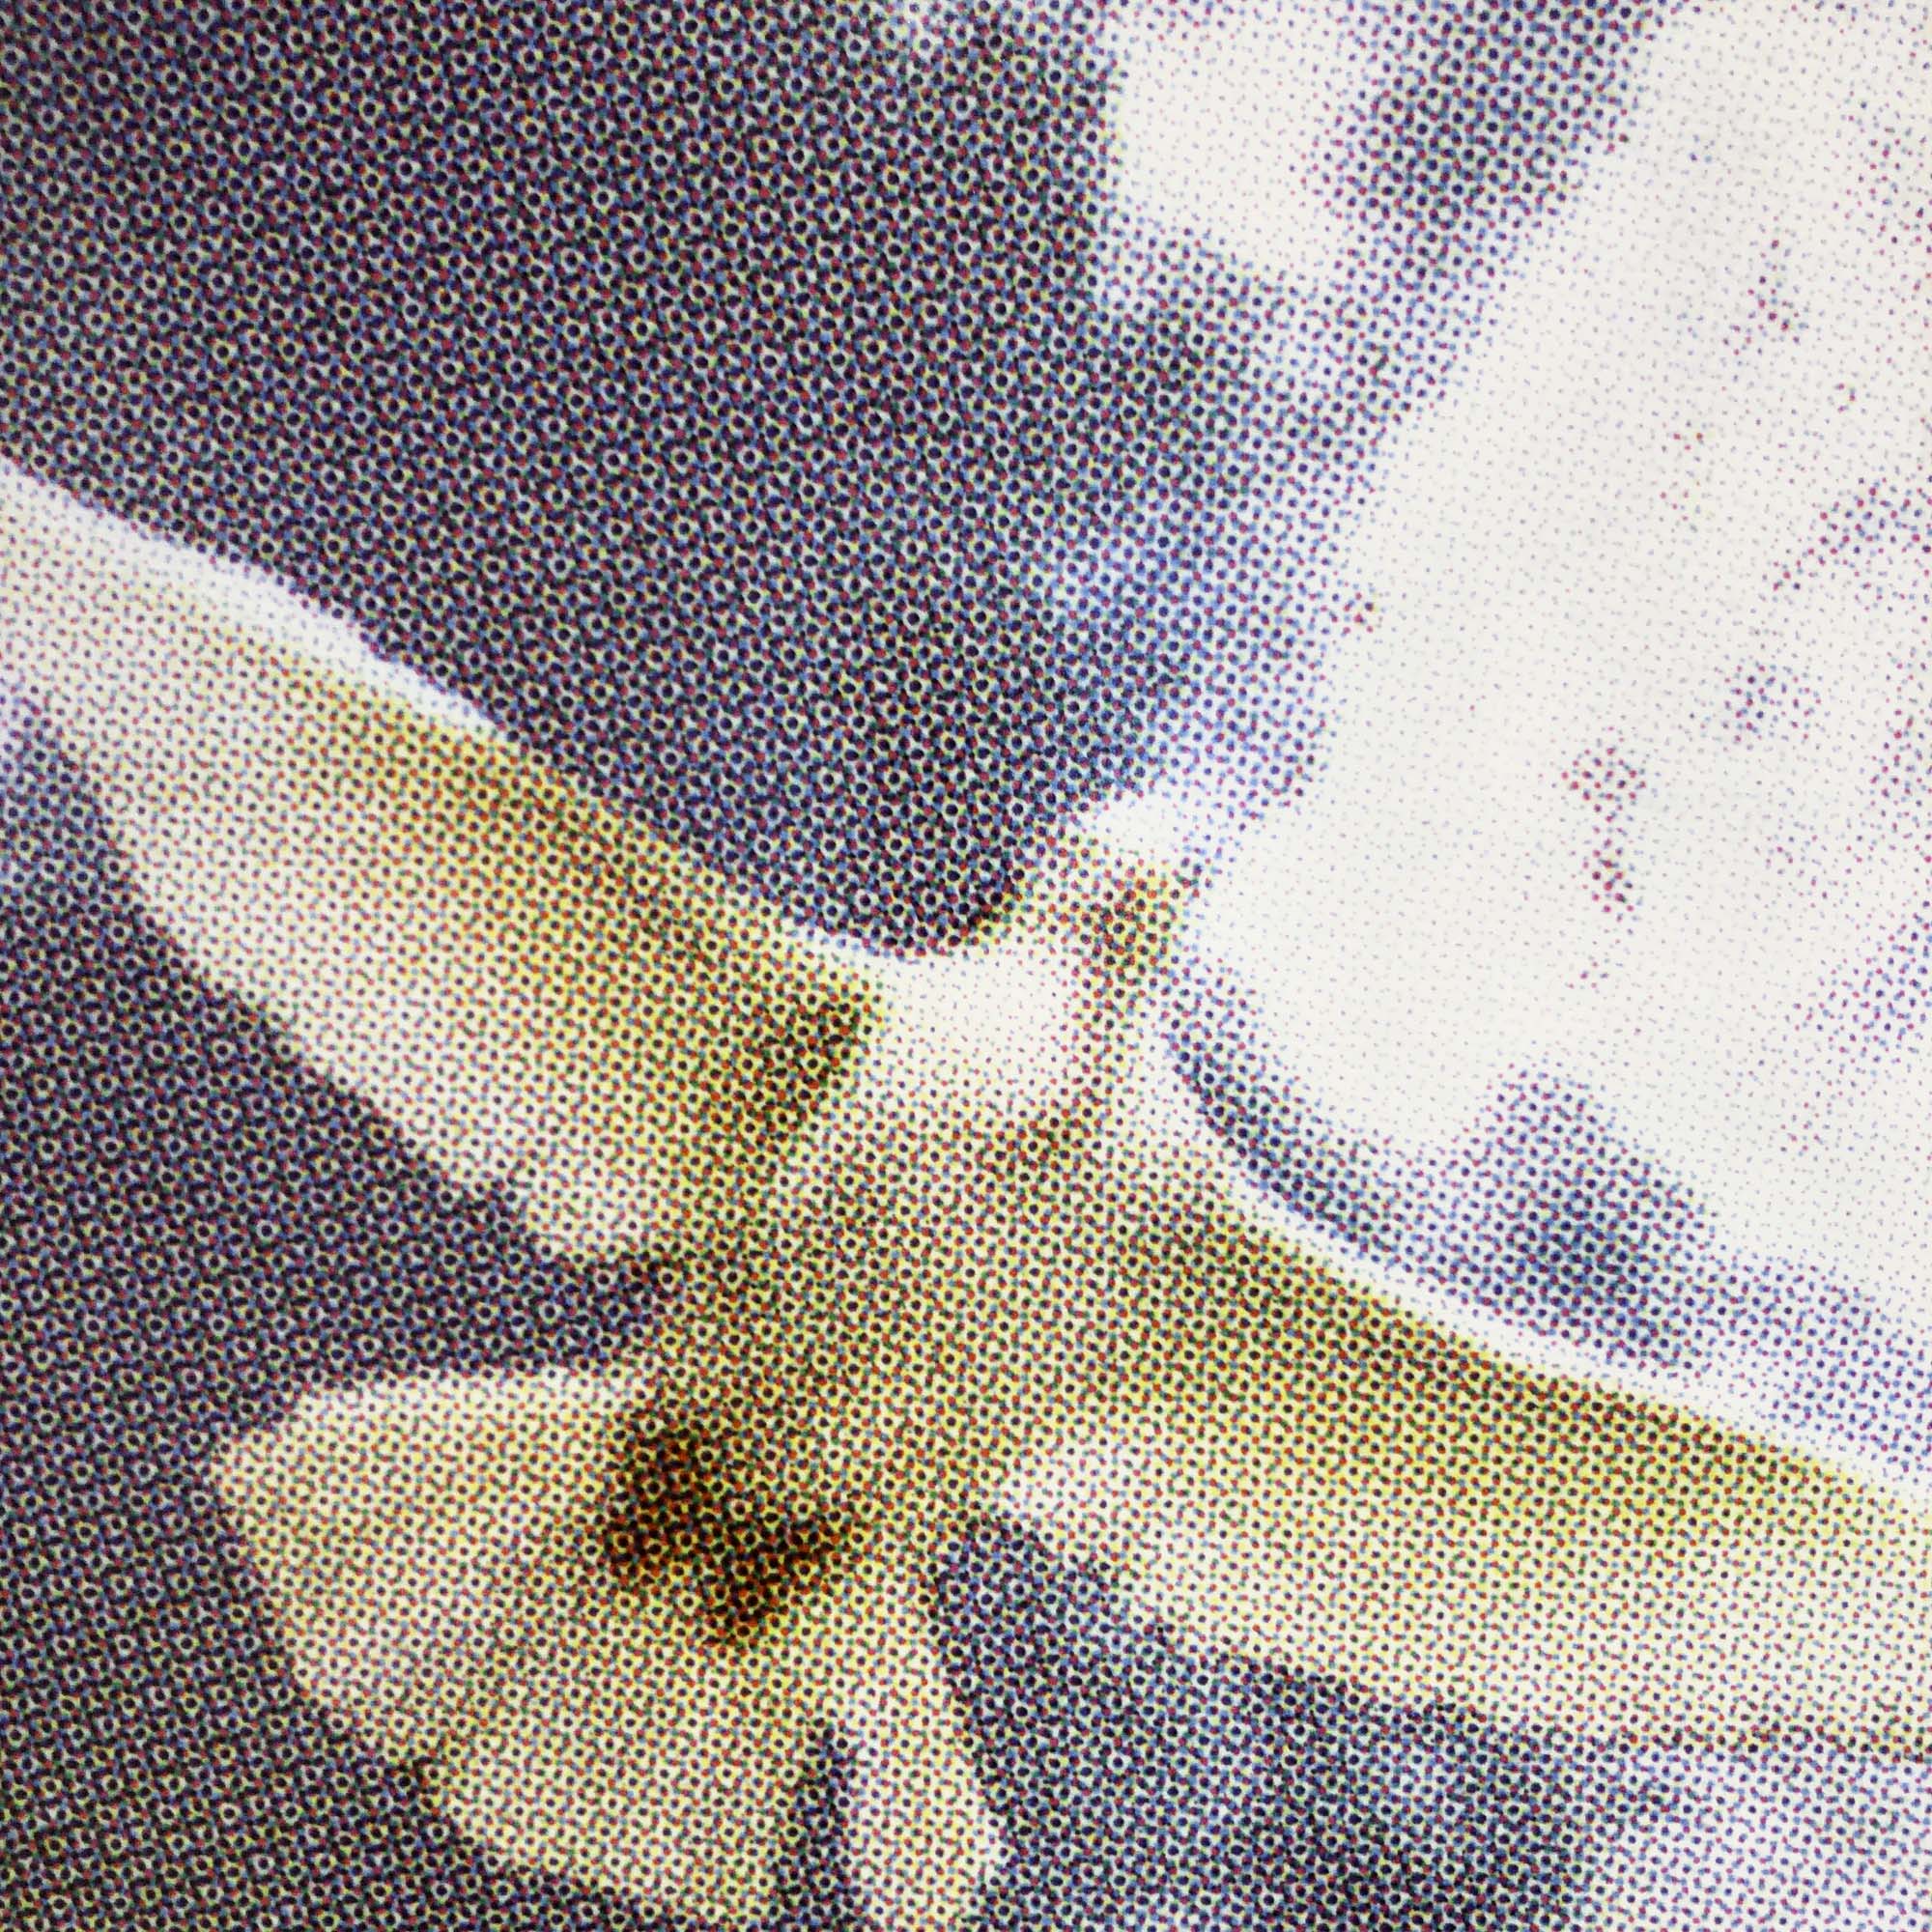 a detail image of a half-tone dove flying in the sky